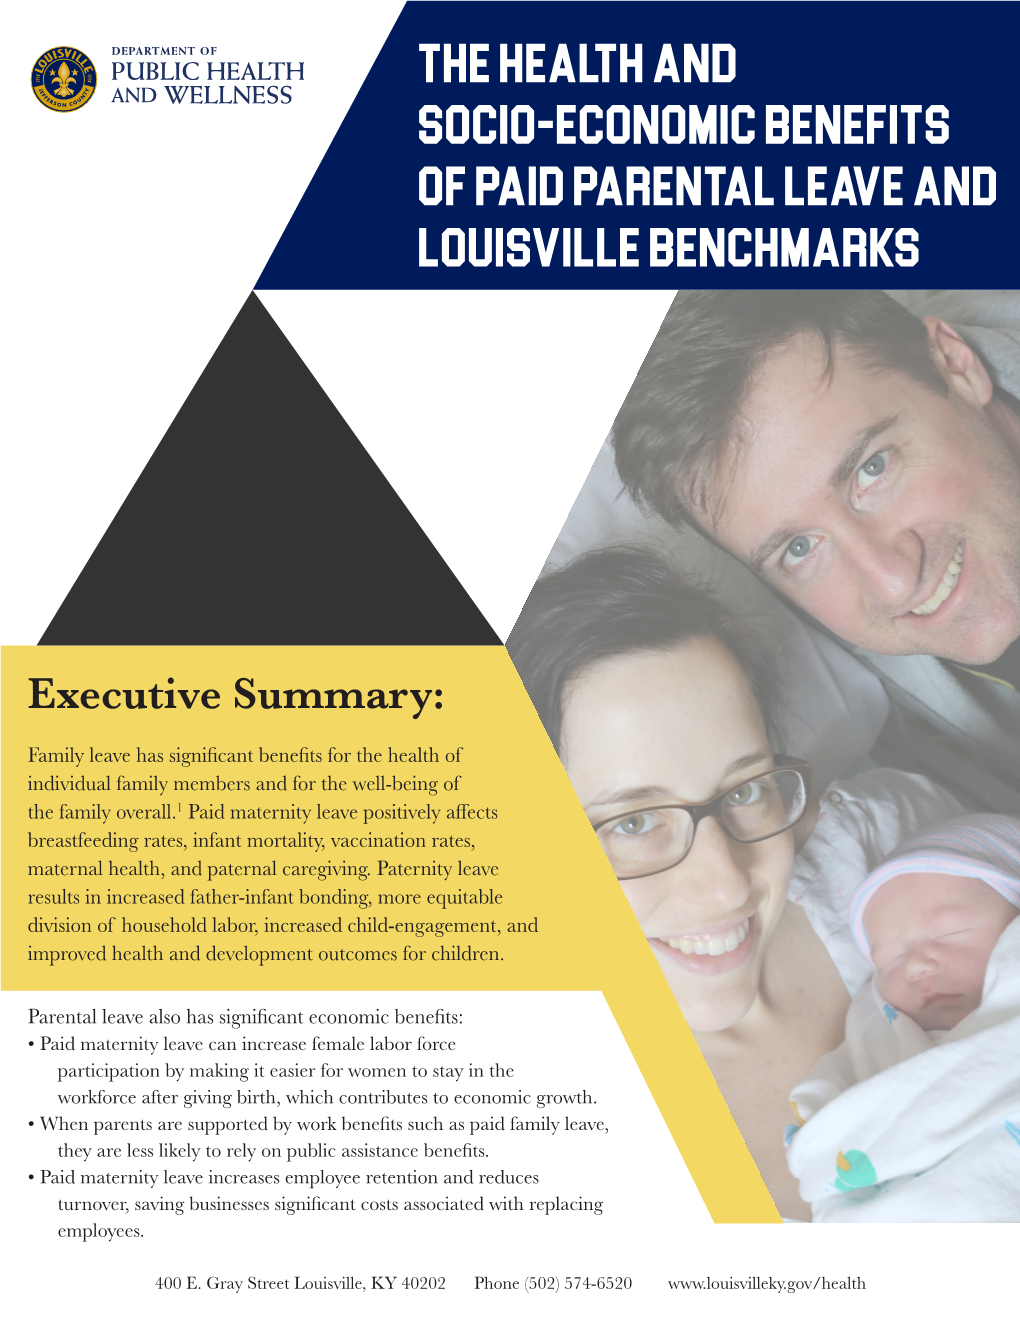 The Health and Socio-ECONOMIC Benefits of Paid Parental Leave and Louisville Benchmarks